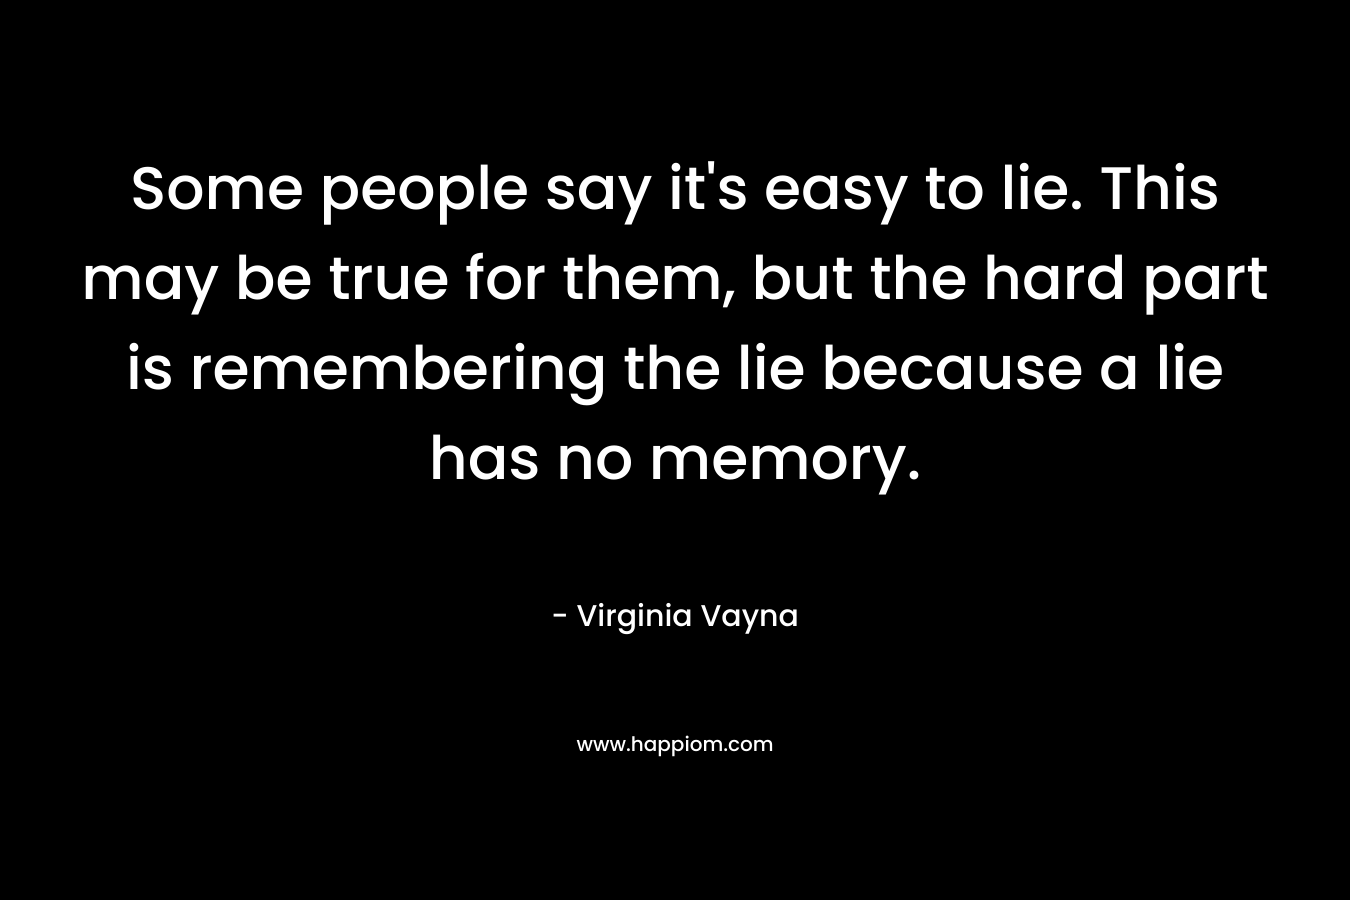 Some people say it’s easy to lie. This may be true for them, but the hard part is remembering the lie because a lie has no memory. – Virginia Vayna